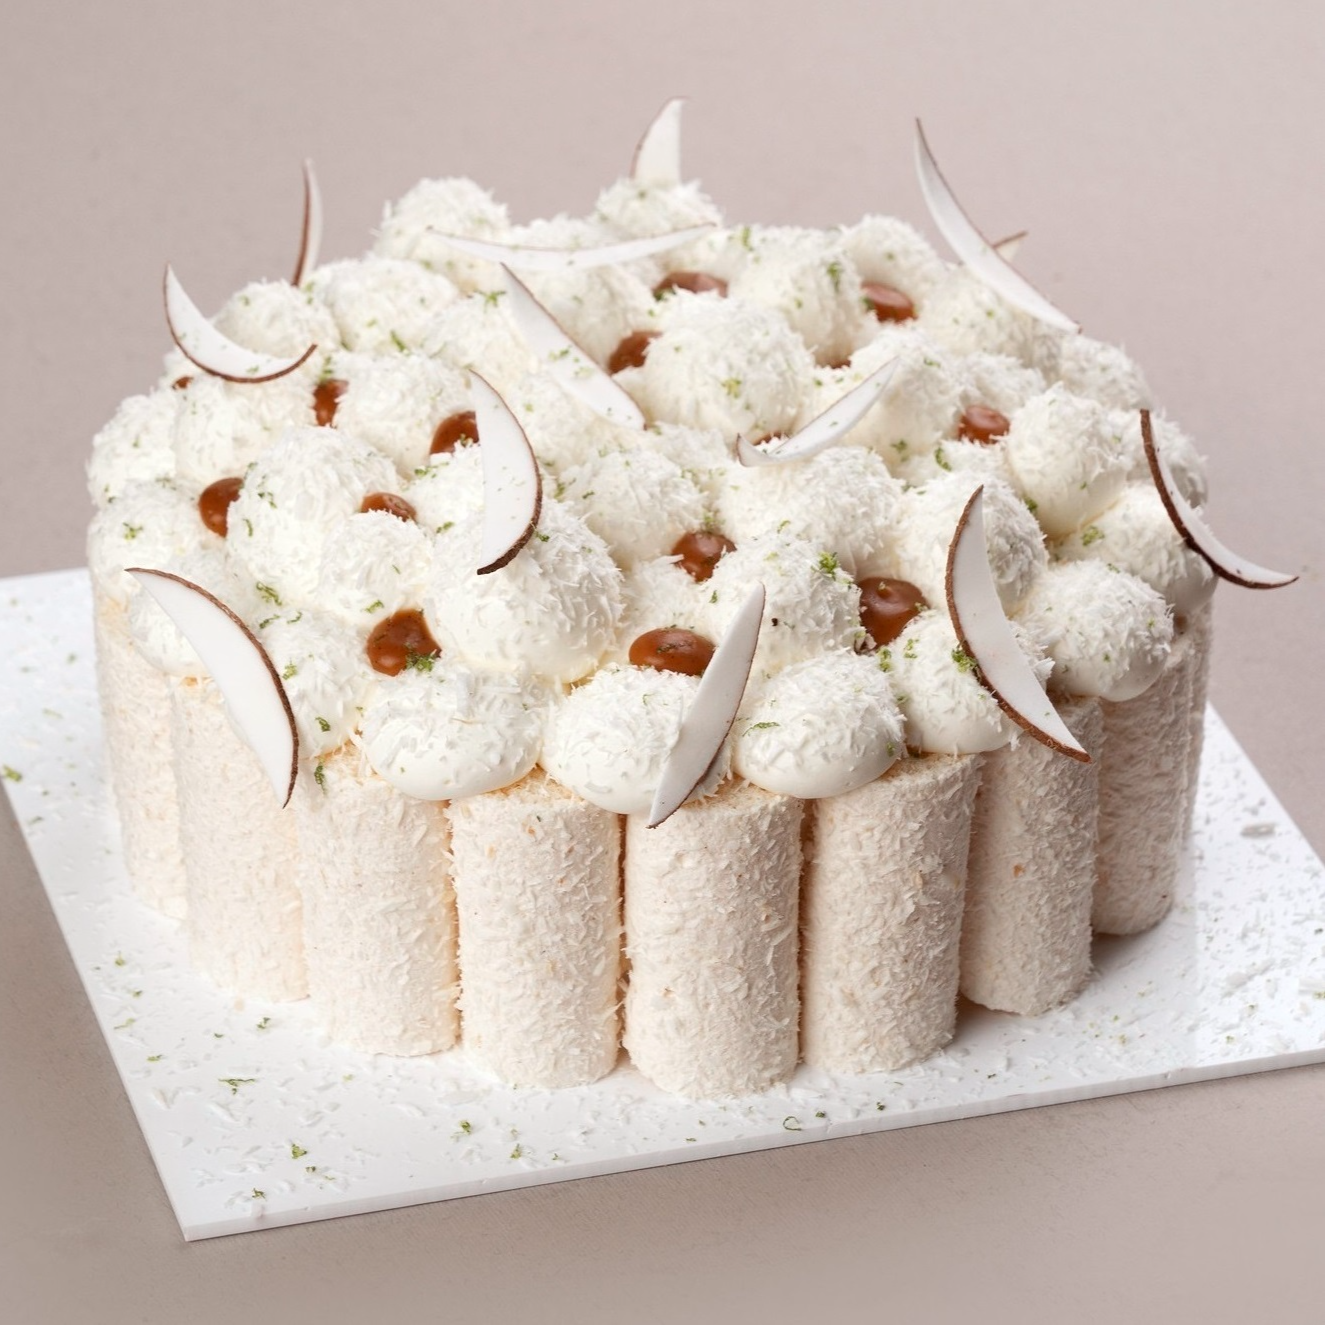 Coconut and Caramel cake